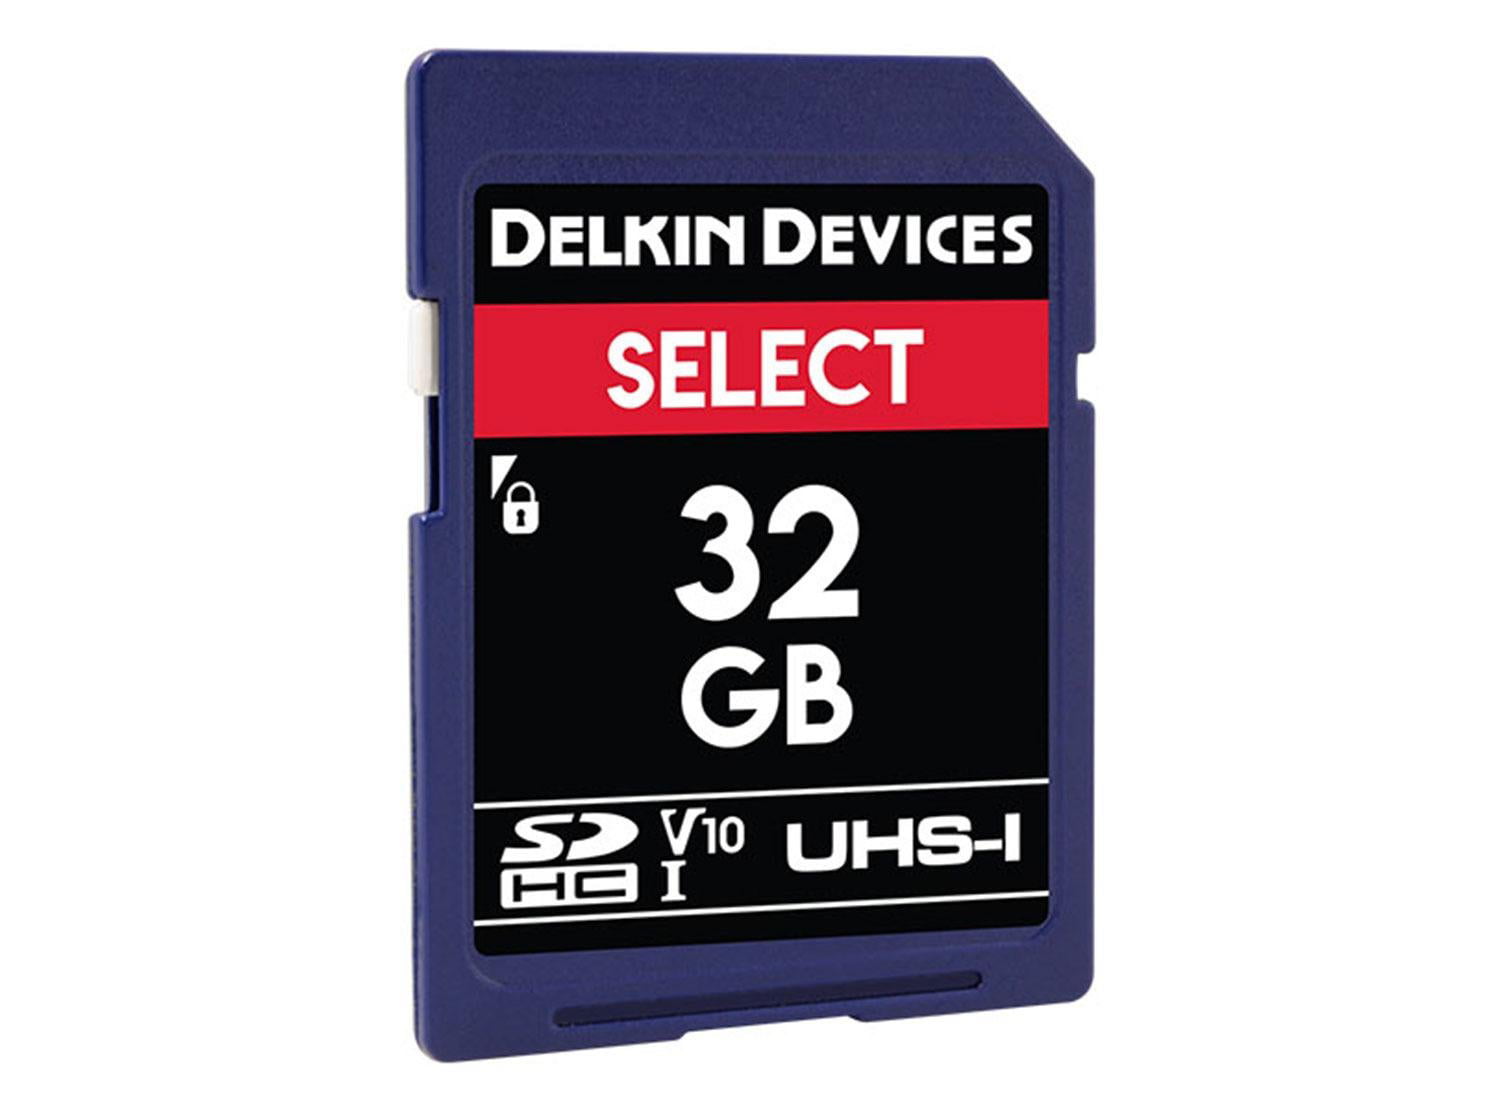 Delkin devices select SDXC 64gb UHS-I v10. Delkin Prime SD 128gb SDXC UHS-II (v60). Delkin devices Black SDXC 64gb UHS-I v30. Black SD 128gb UHS-II SDXC u3 v90 (dsdbv90128) карта памяти для фотоаппарата Delkin. Devices 32